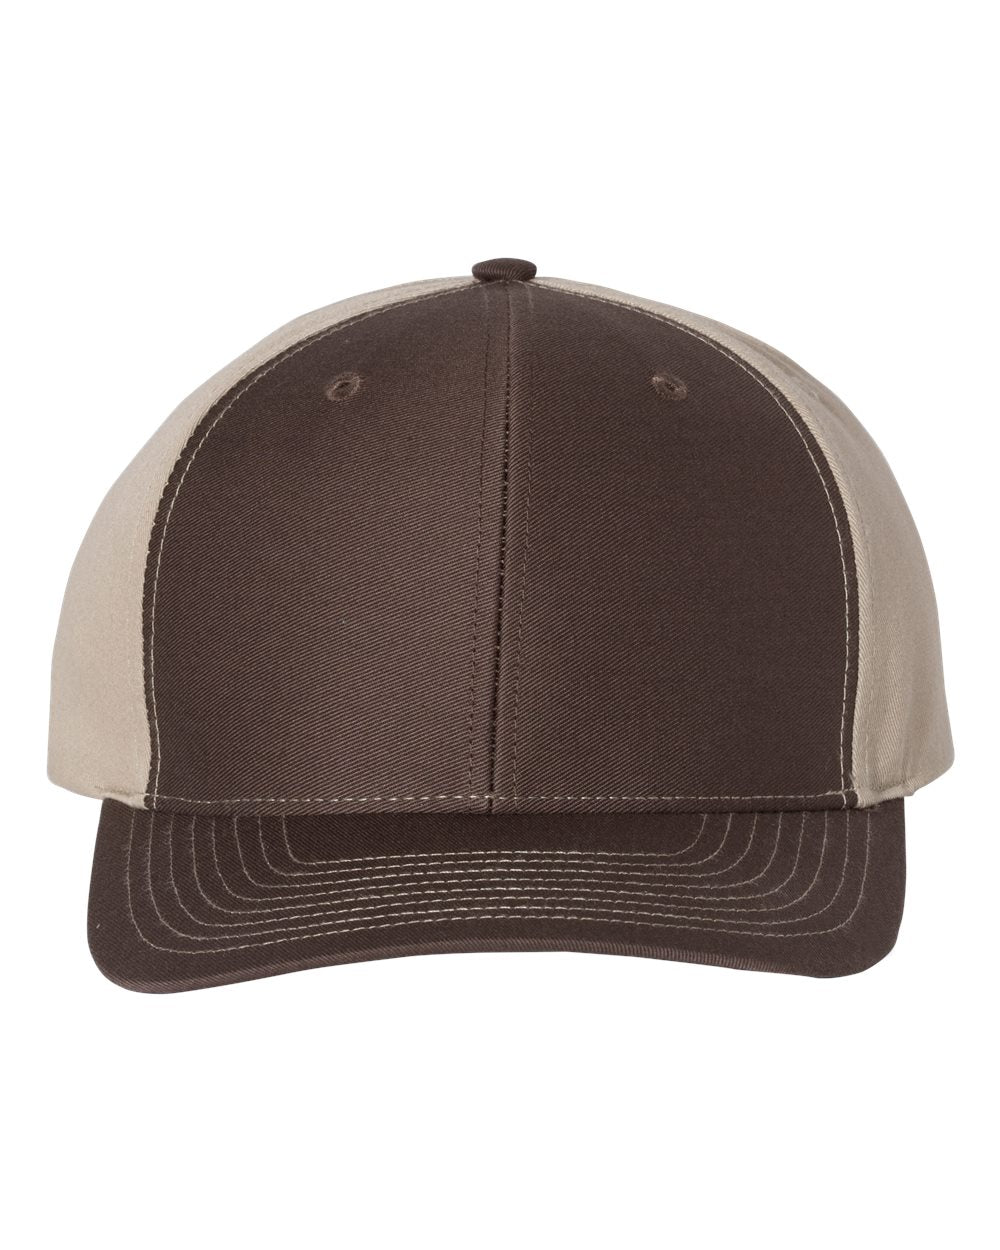 A Richardson twill back trucker cap with a brown front panel and khaki twill back.